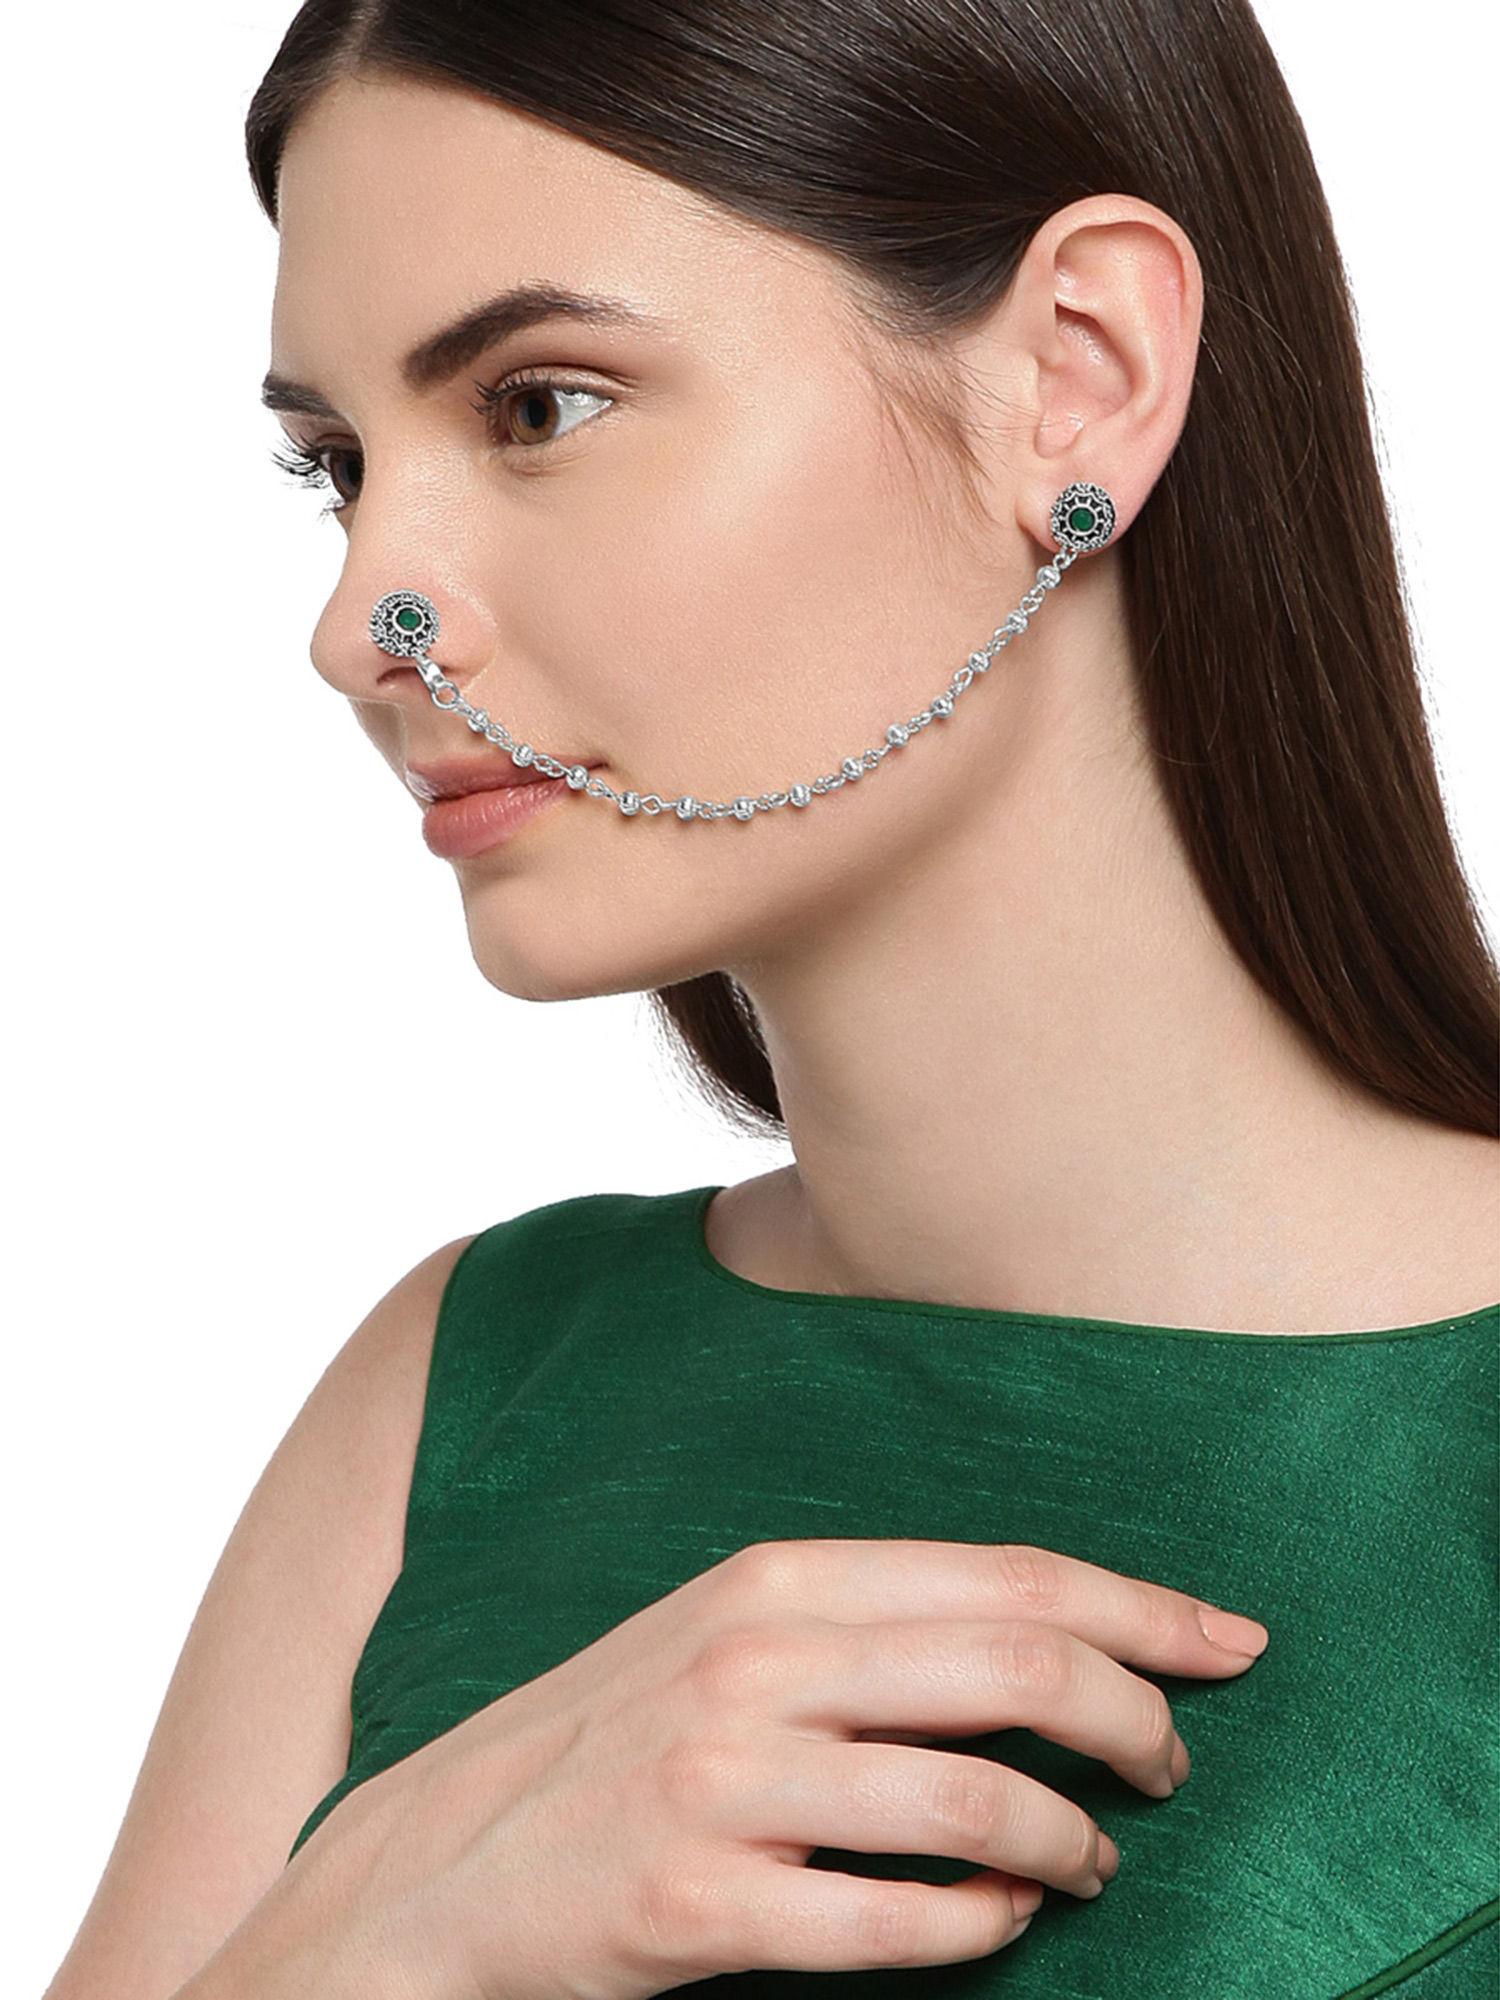 silver tone clip-on nose pin chain linked with stud earrings